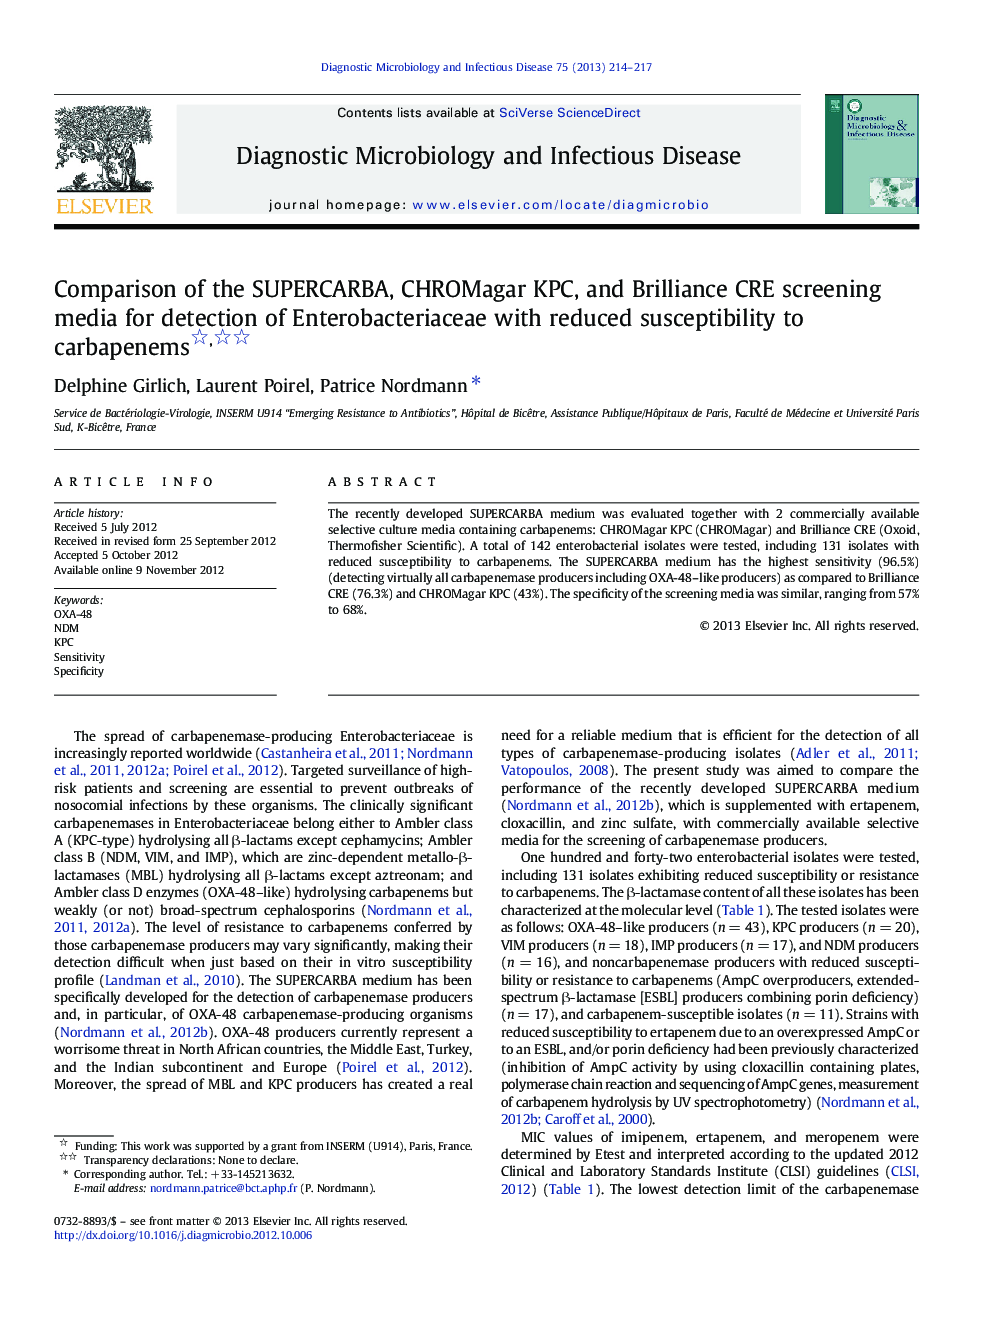 Comparison of the SUPERCARBA, CHROMagar KPC, and Brilliance CRE screening media for detection of Enterobacteriaceae with reduced susceptibility to carbapenems